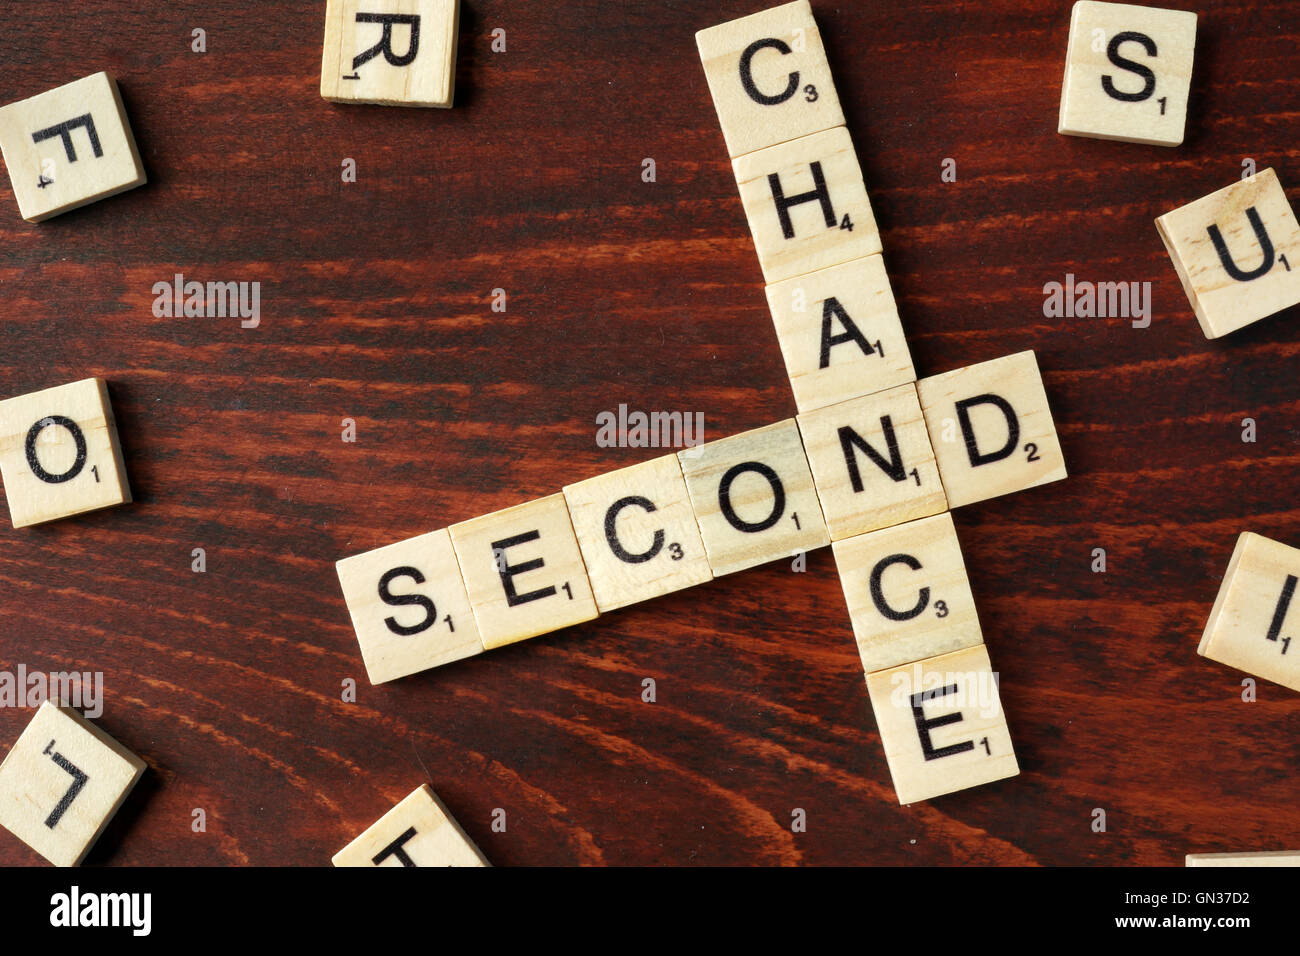 Words Second Chance from wooden blocks with letters. Stock Photo